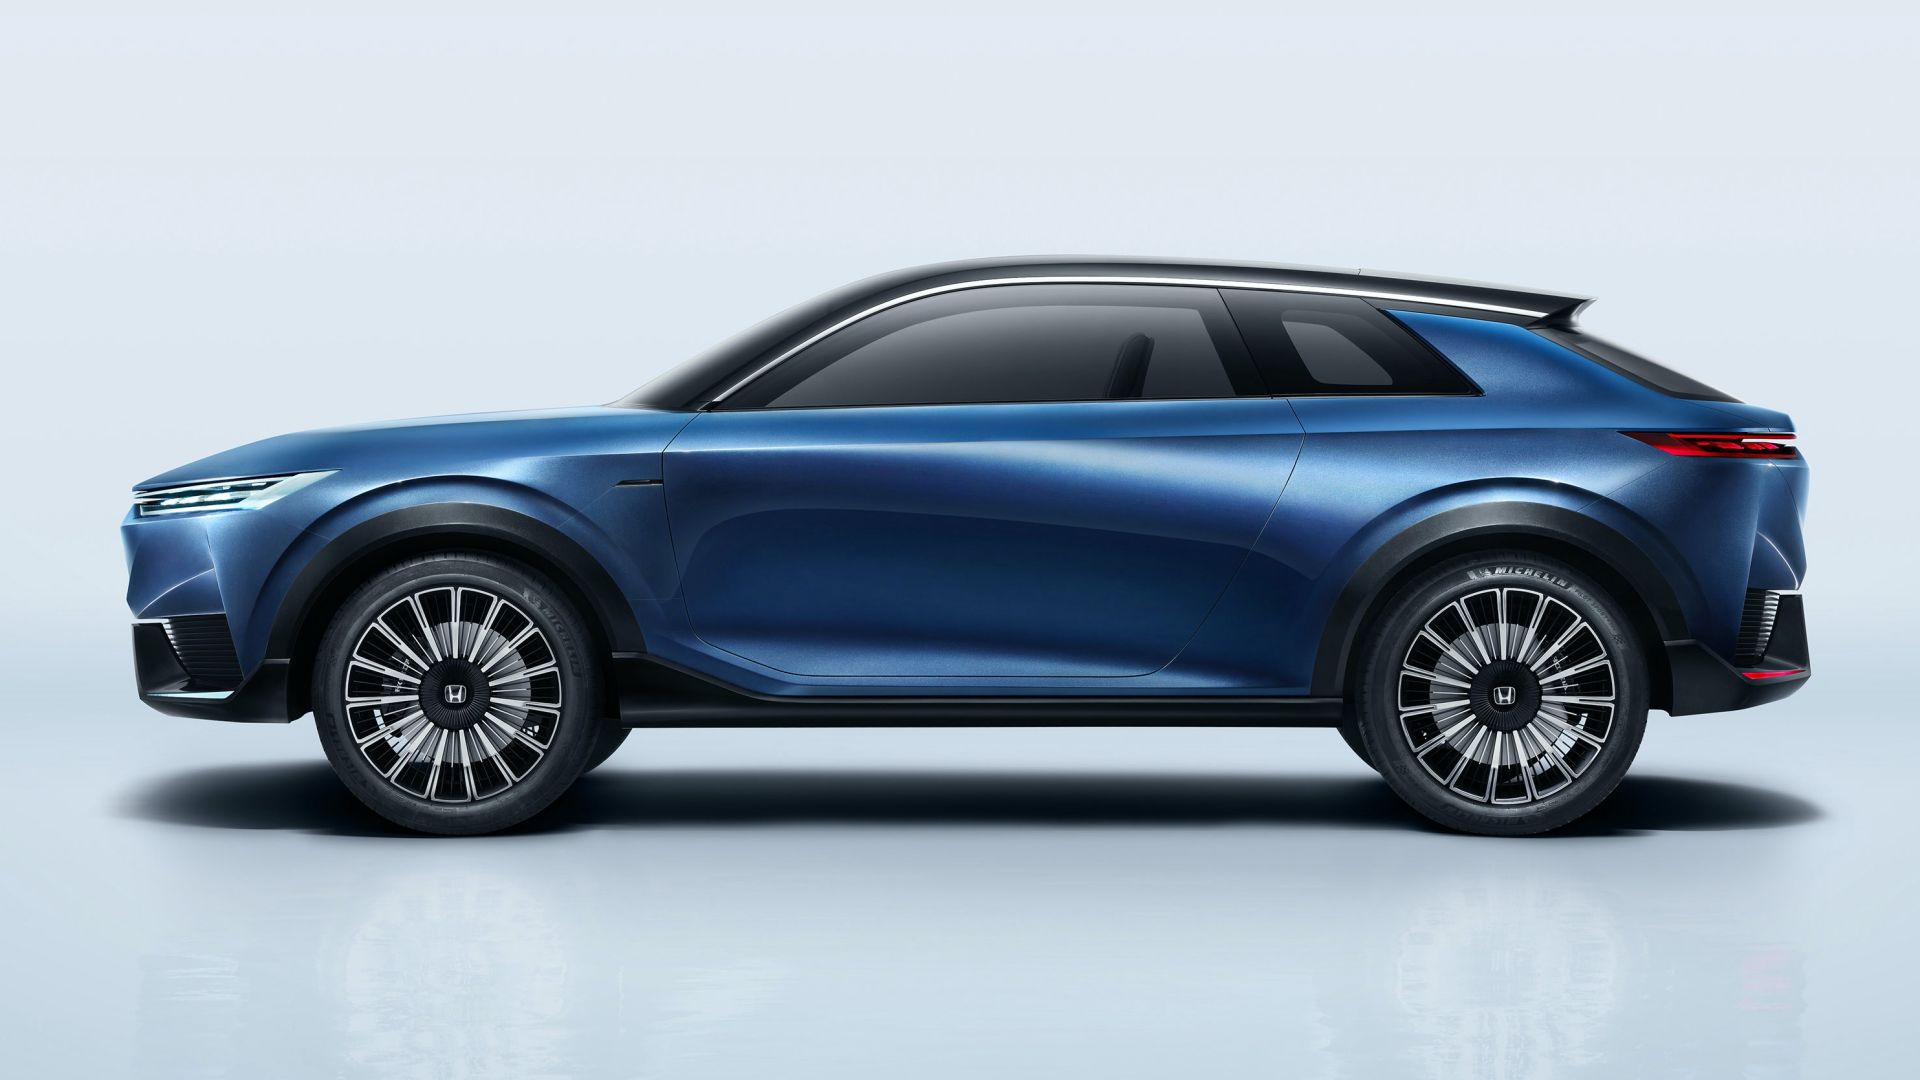 Honda SUV e:concept Is An Enticing Preview Of The Brand’s First EV For